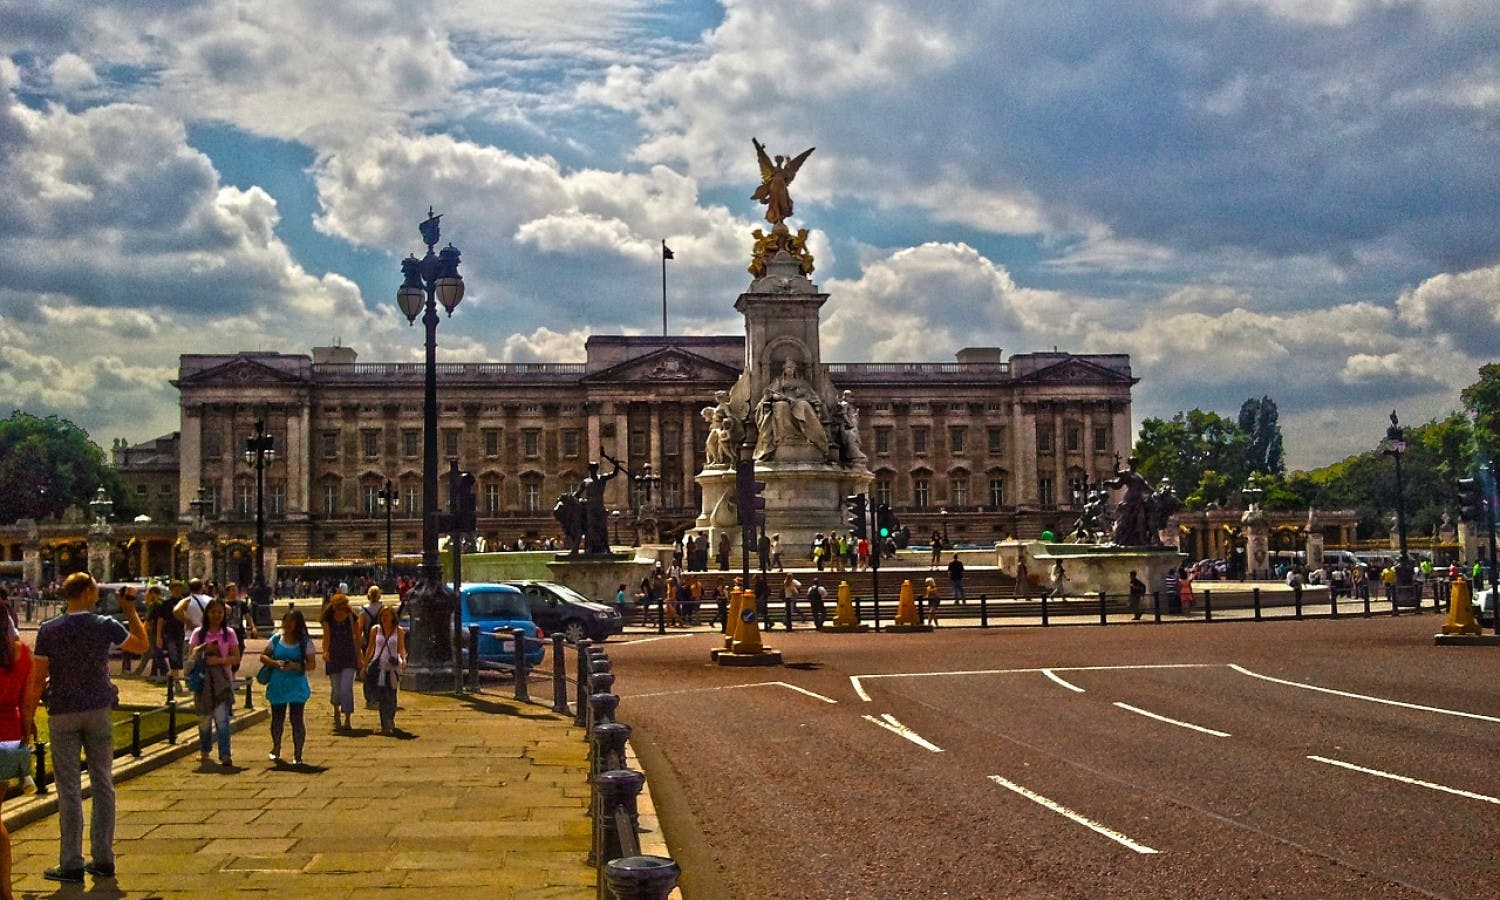 Buckingham Palace - Tour and Tickets